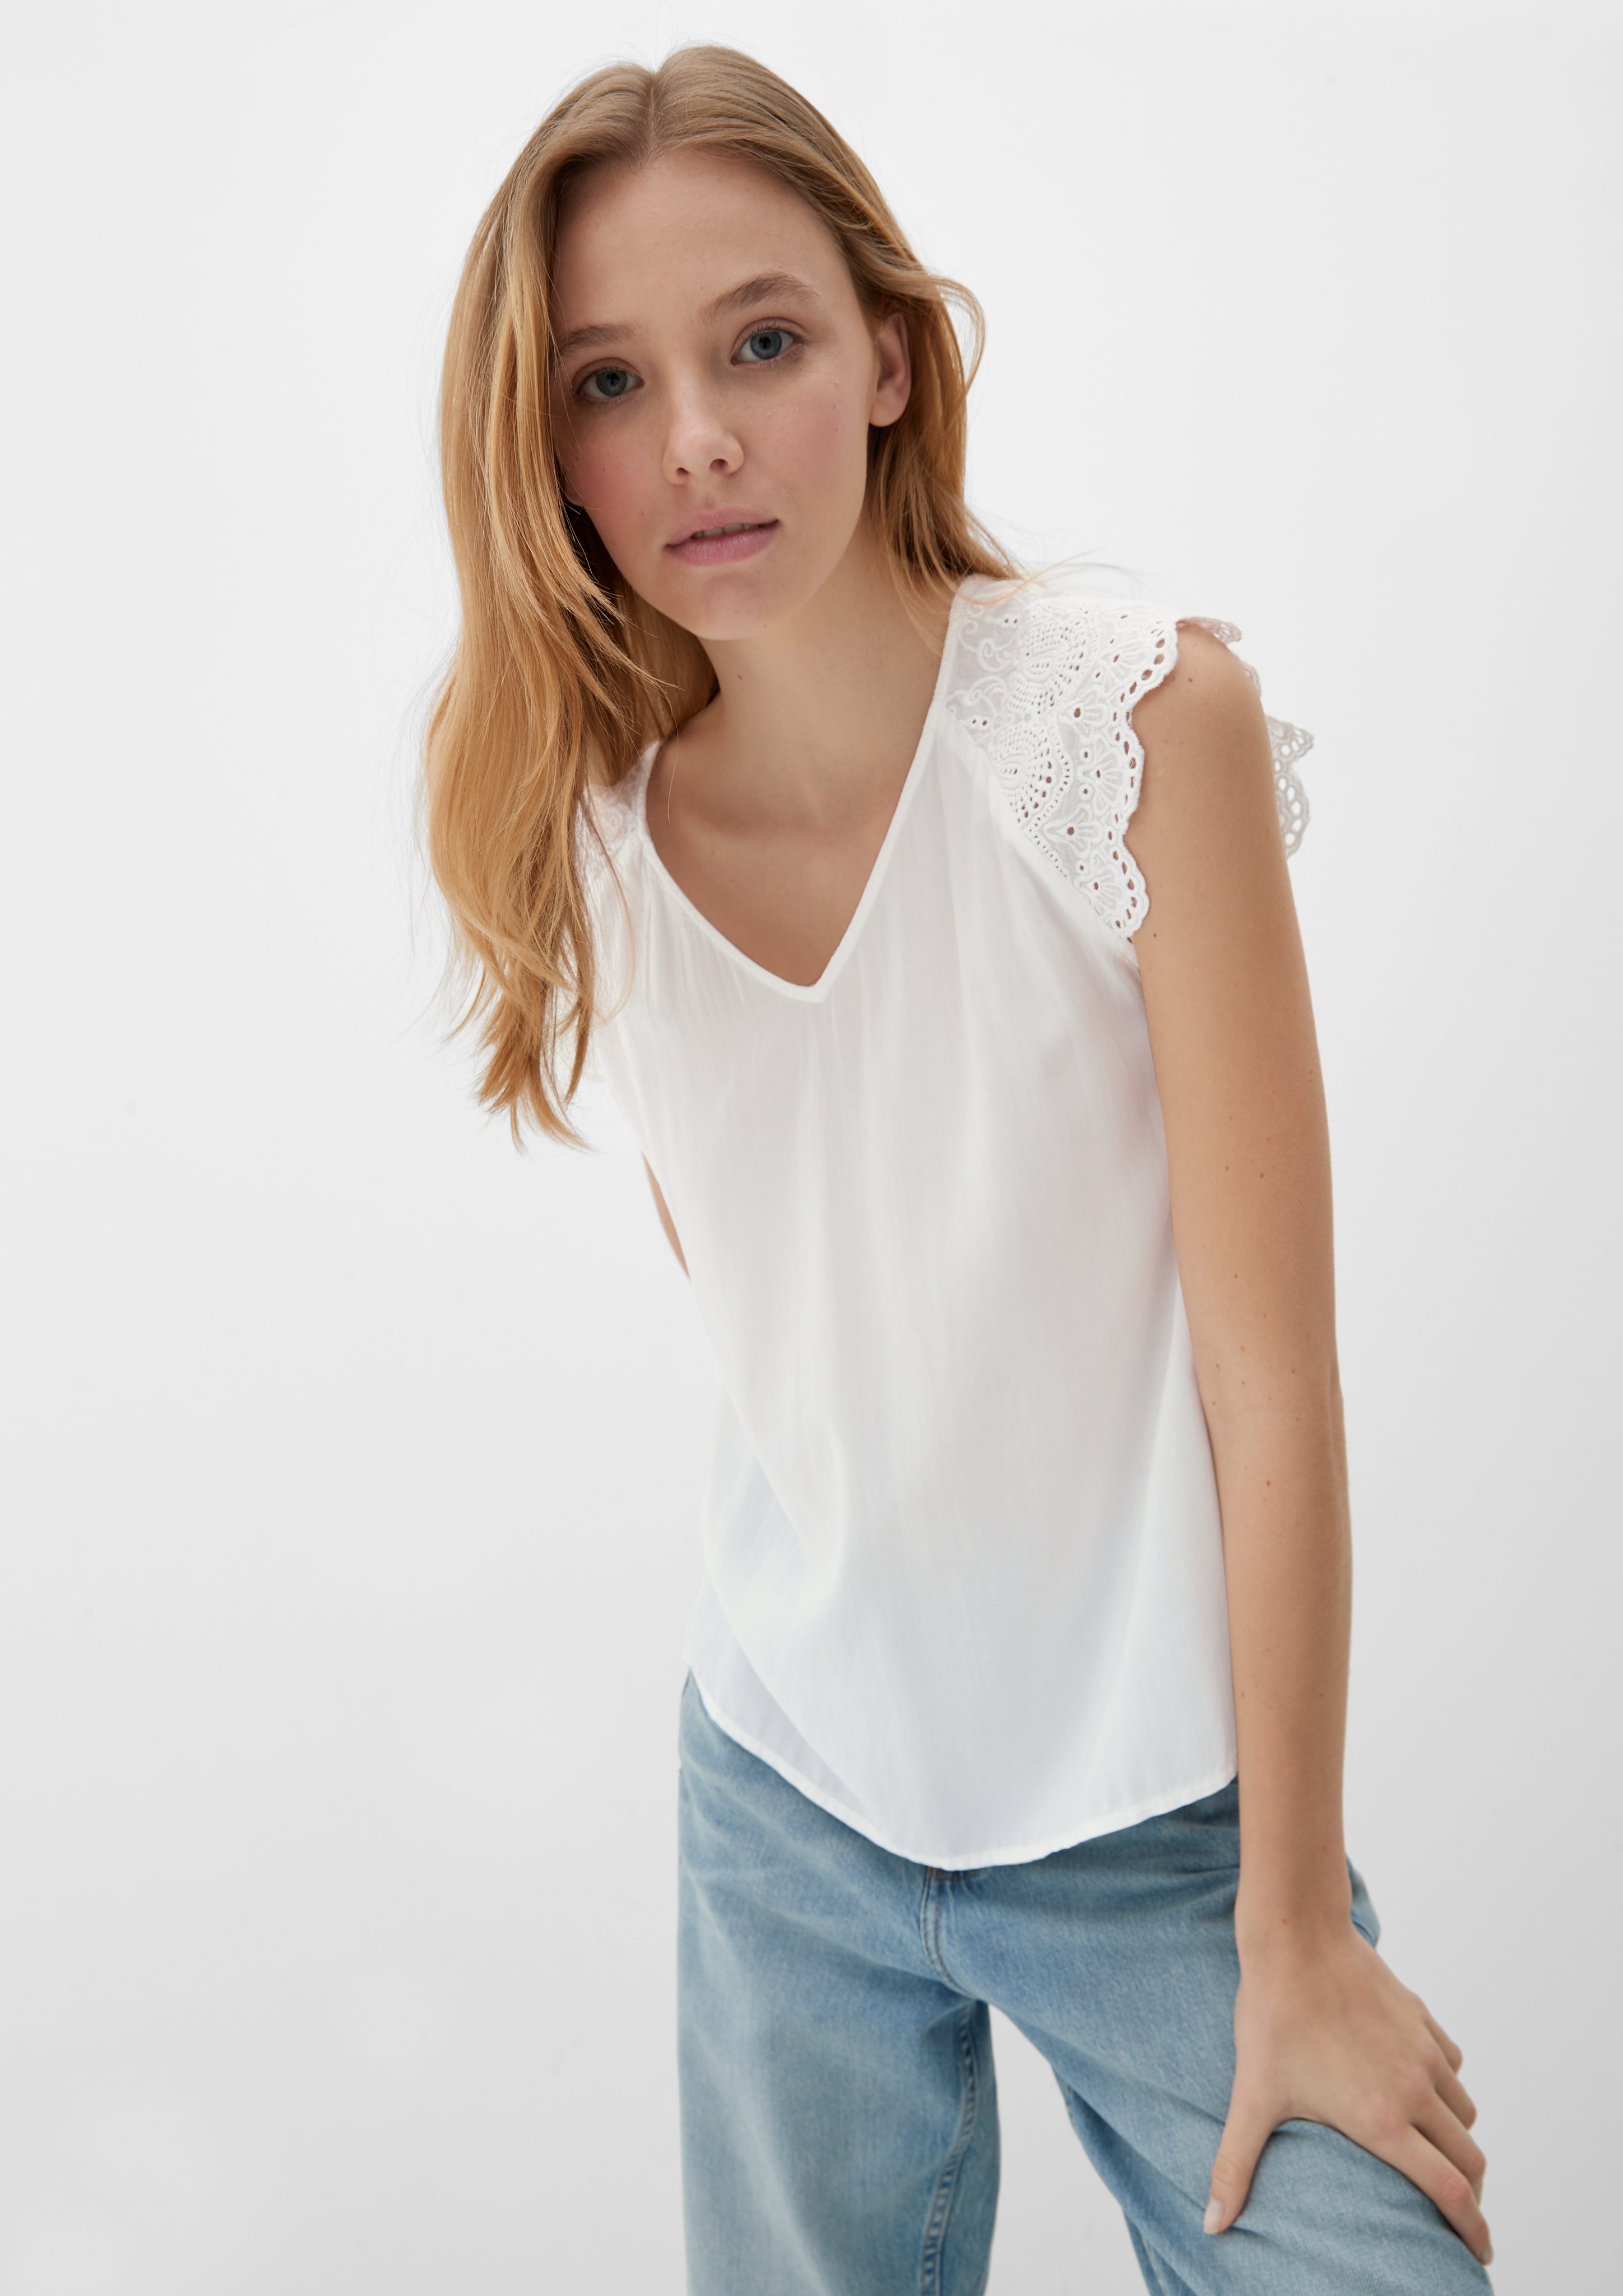 Broderie QS Bluse Blusentop Anglaise mit ecru